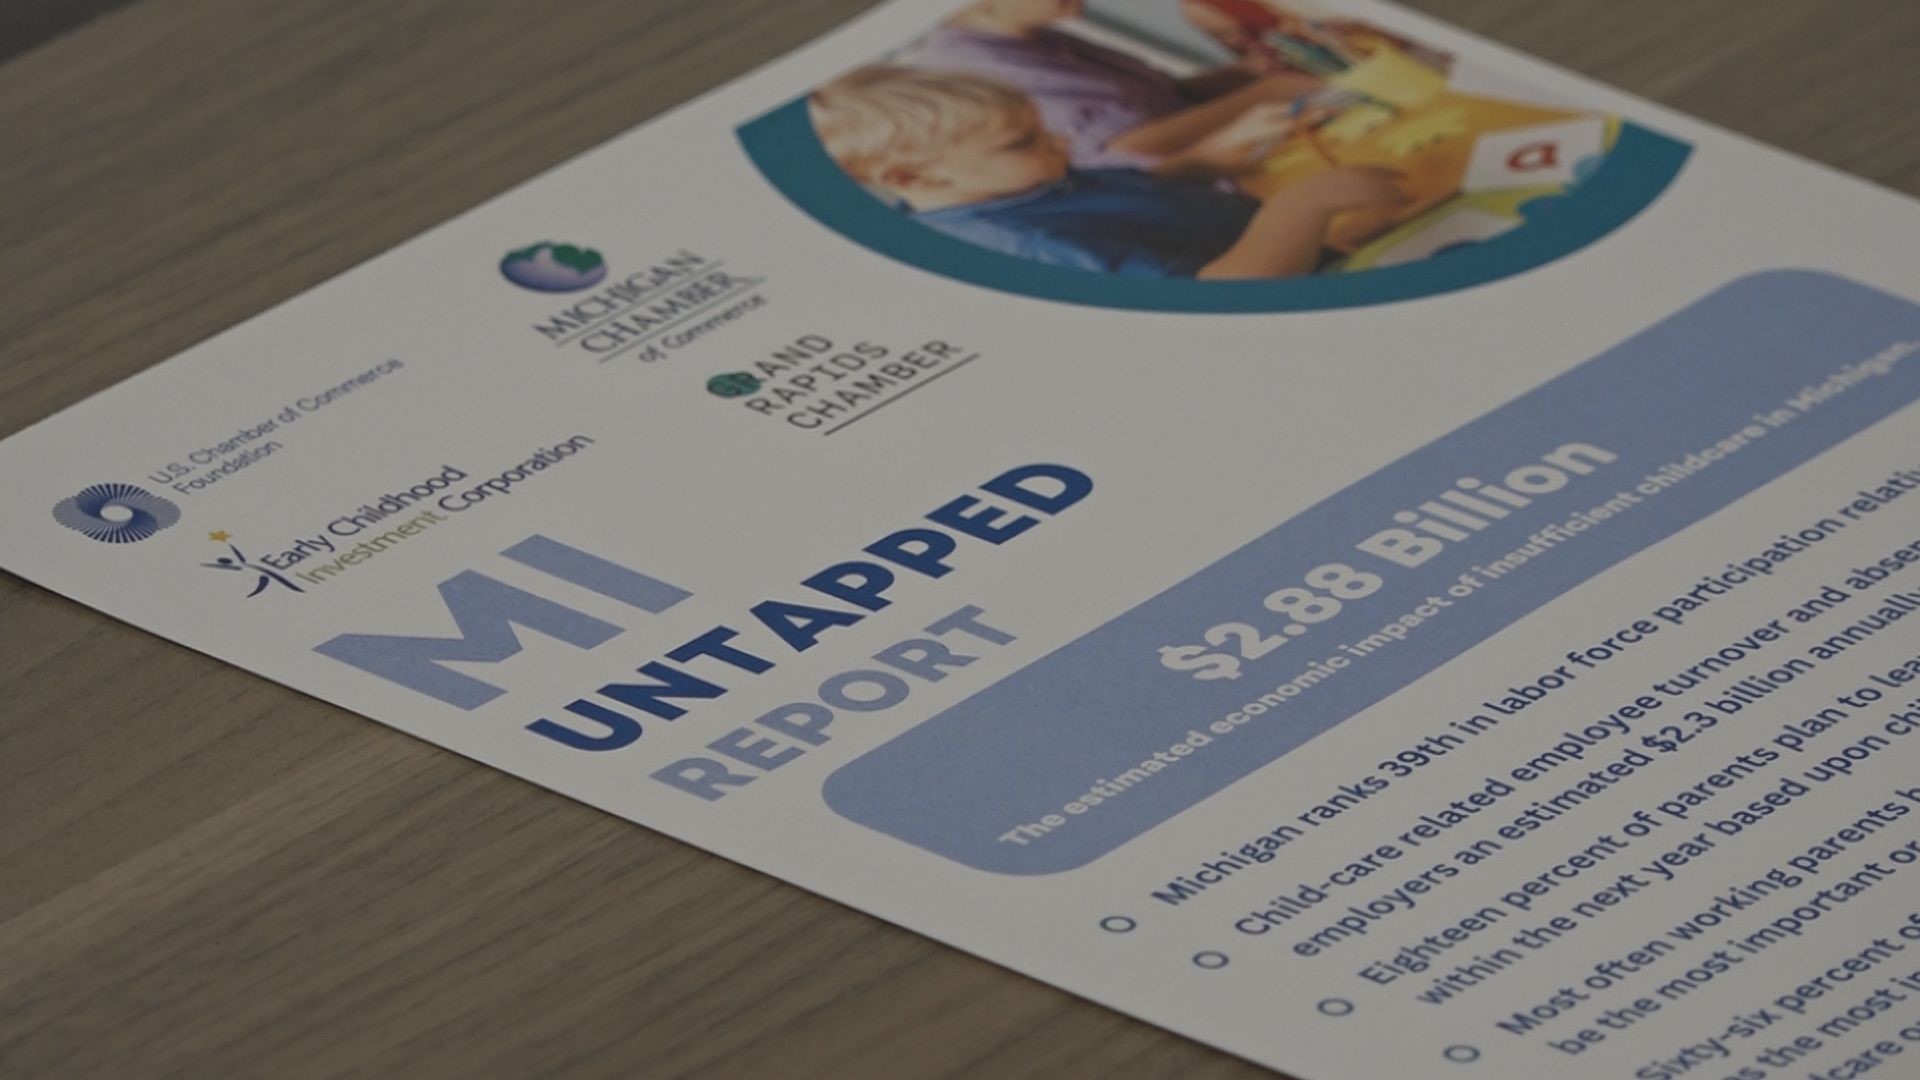 The MI Untapped Potential report says nearly half of Michigan parents surveyed could leave their jobs in the next year because of unaffordable child care.